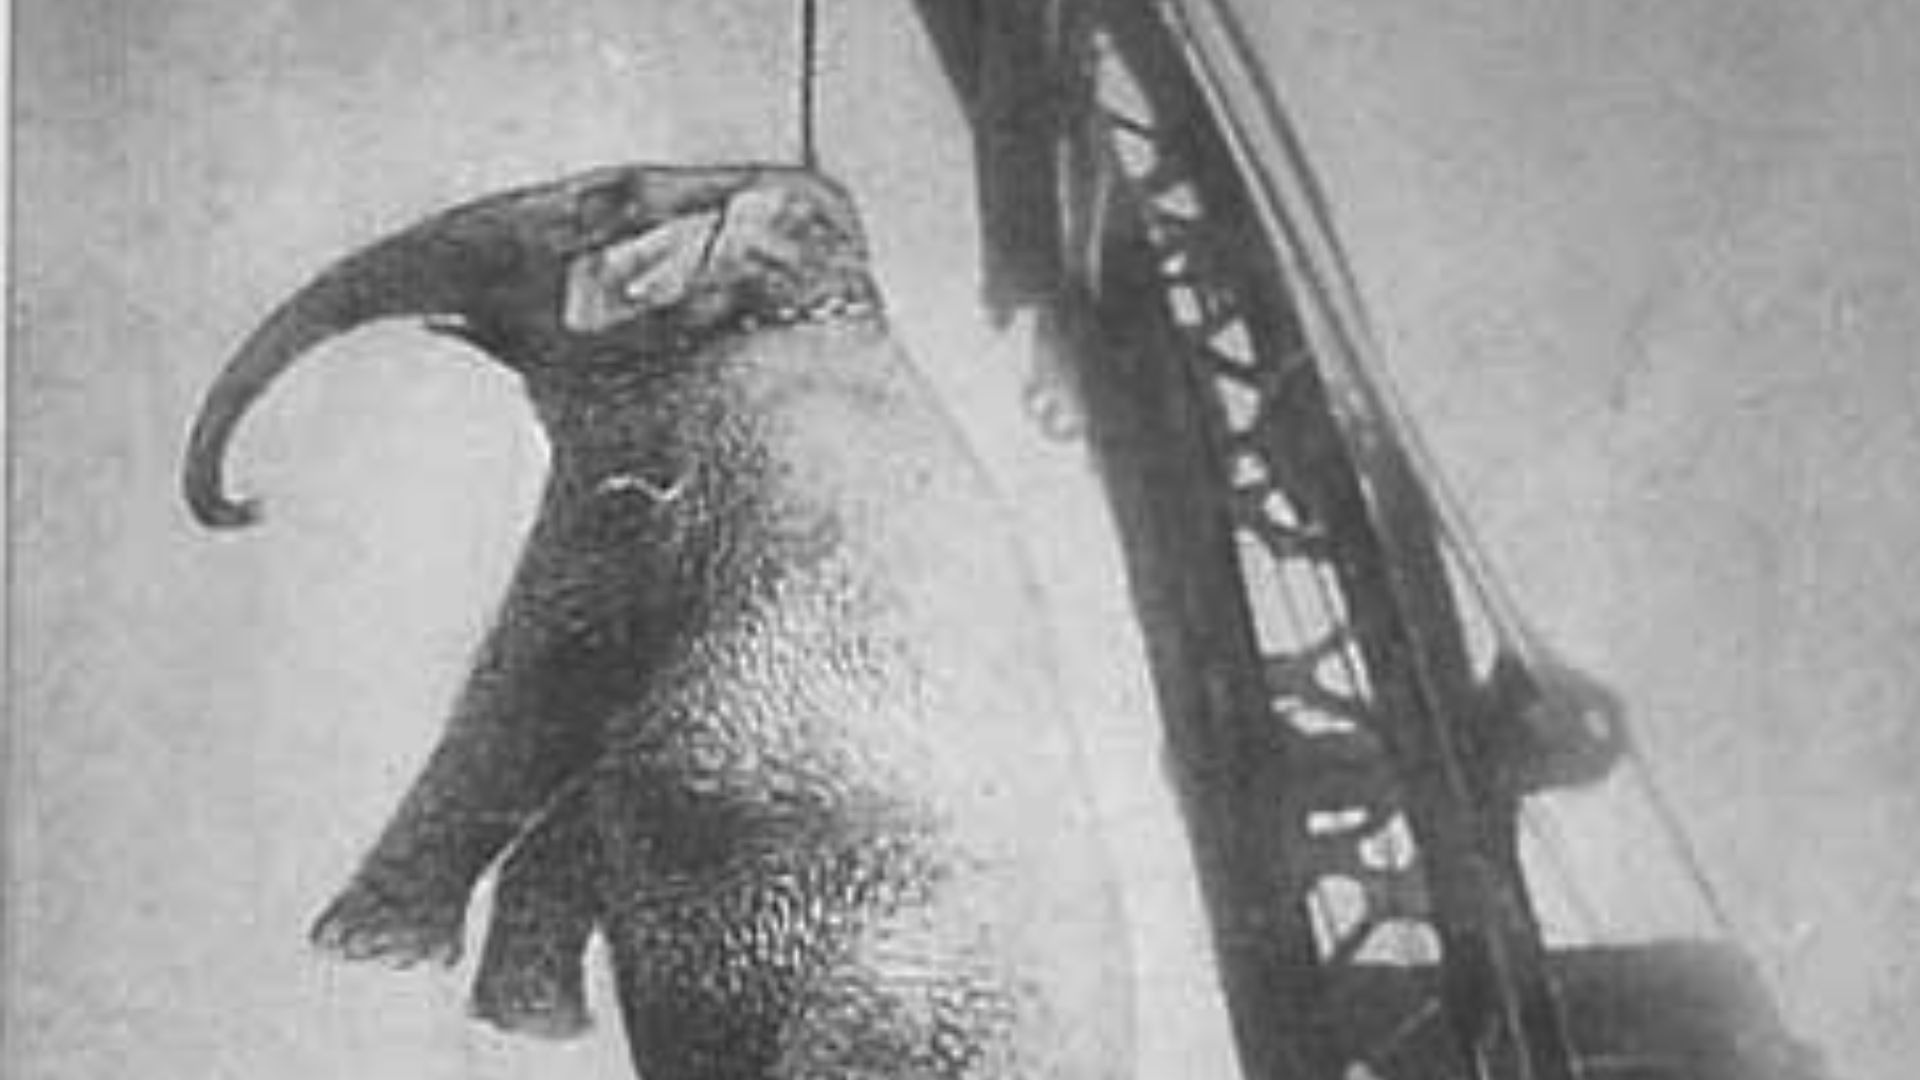 Murderous Mary The Elephant Is Hanged